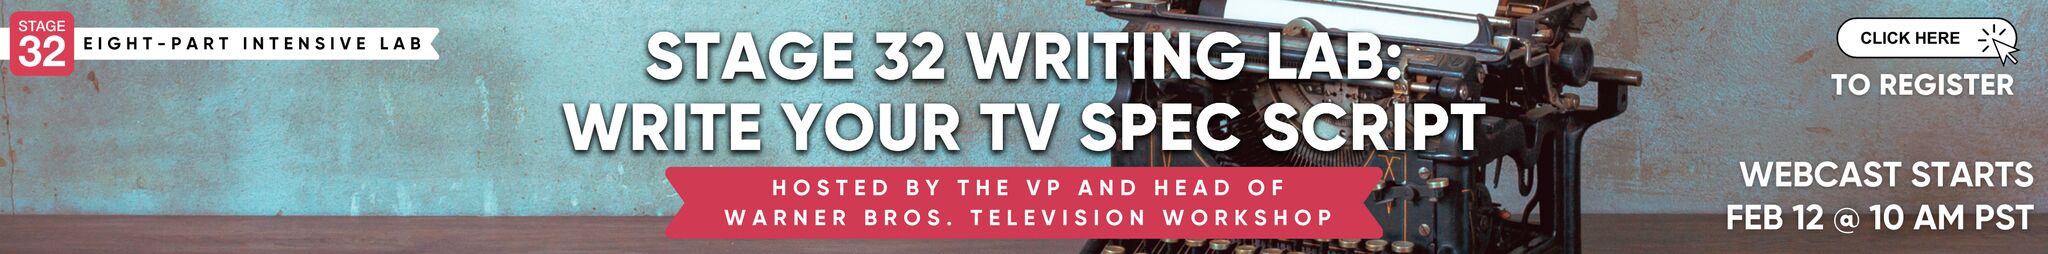 Stage 32 Writing Lab: Write Your TV Spec